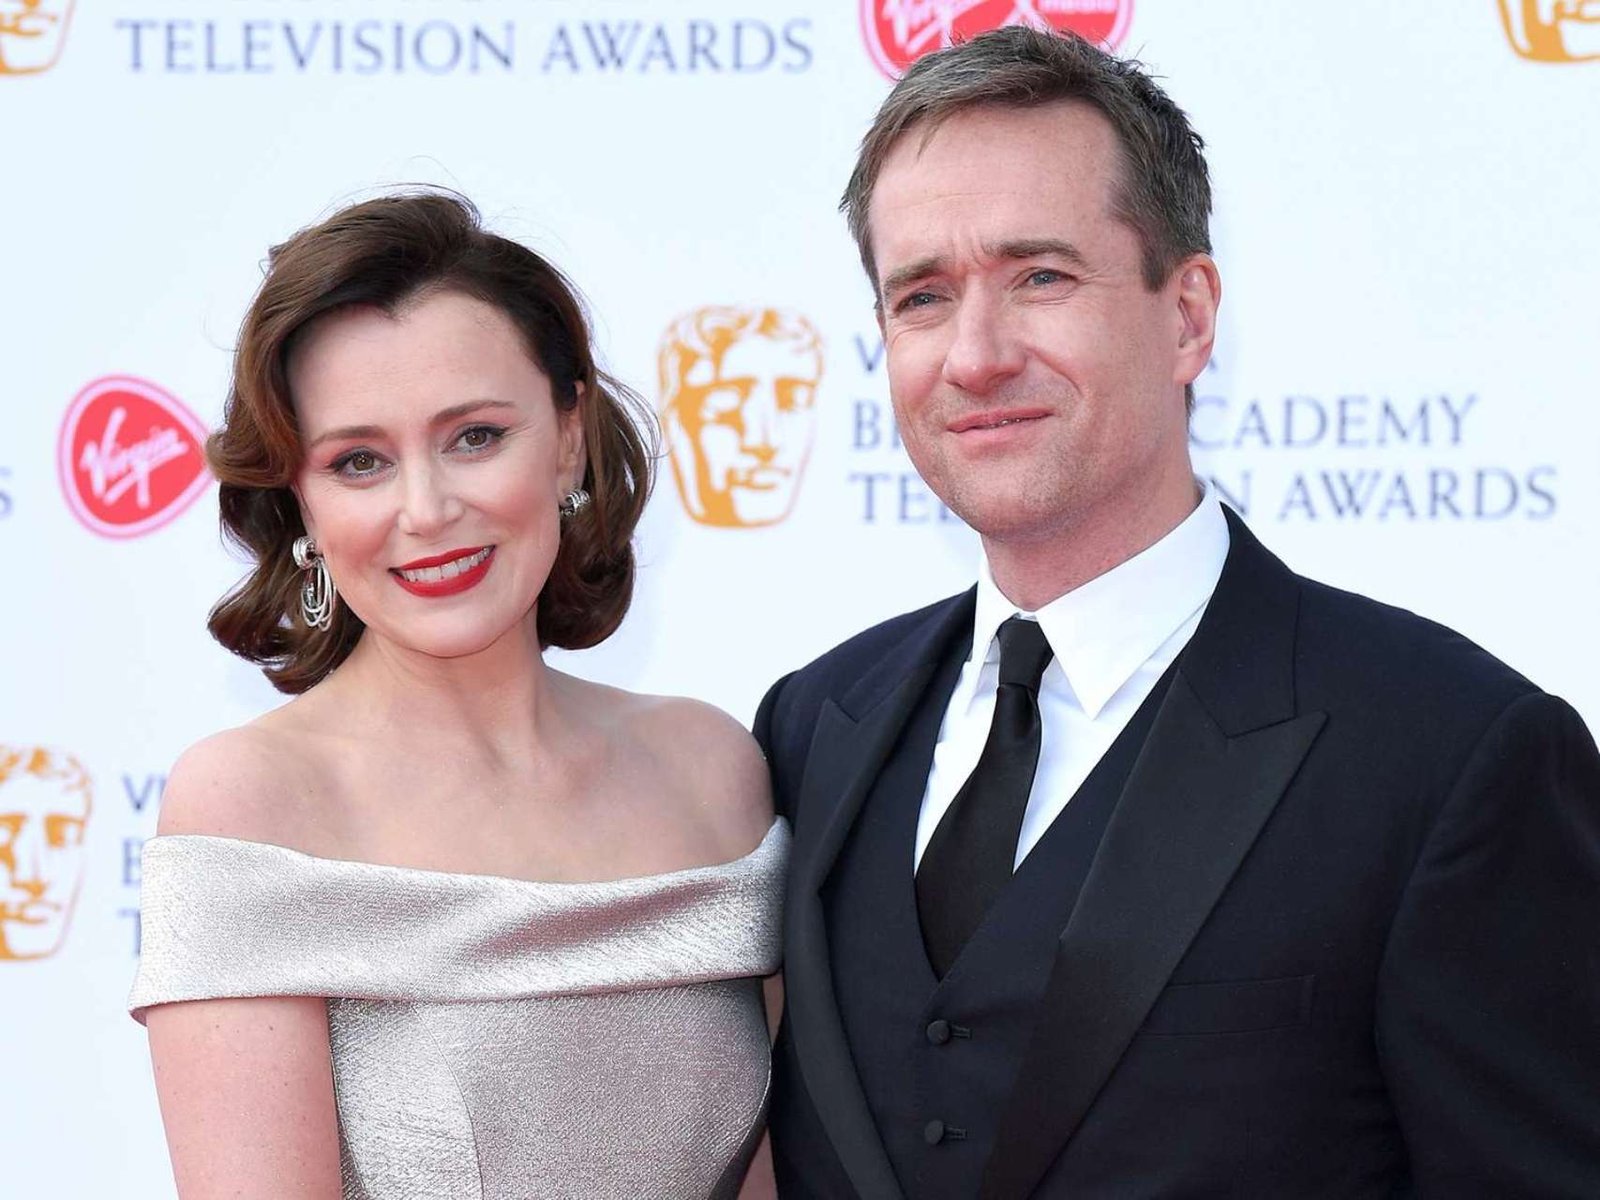 Matthew Macfadyen's Journey from Mr. Darcy to Succession and Lasting Love with Keeley Hawes